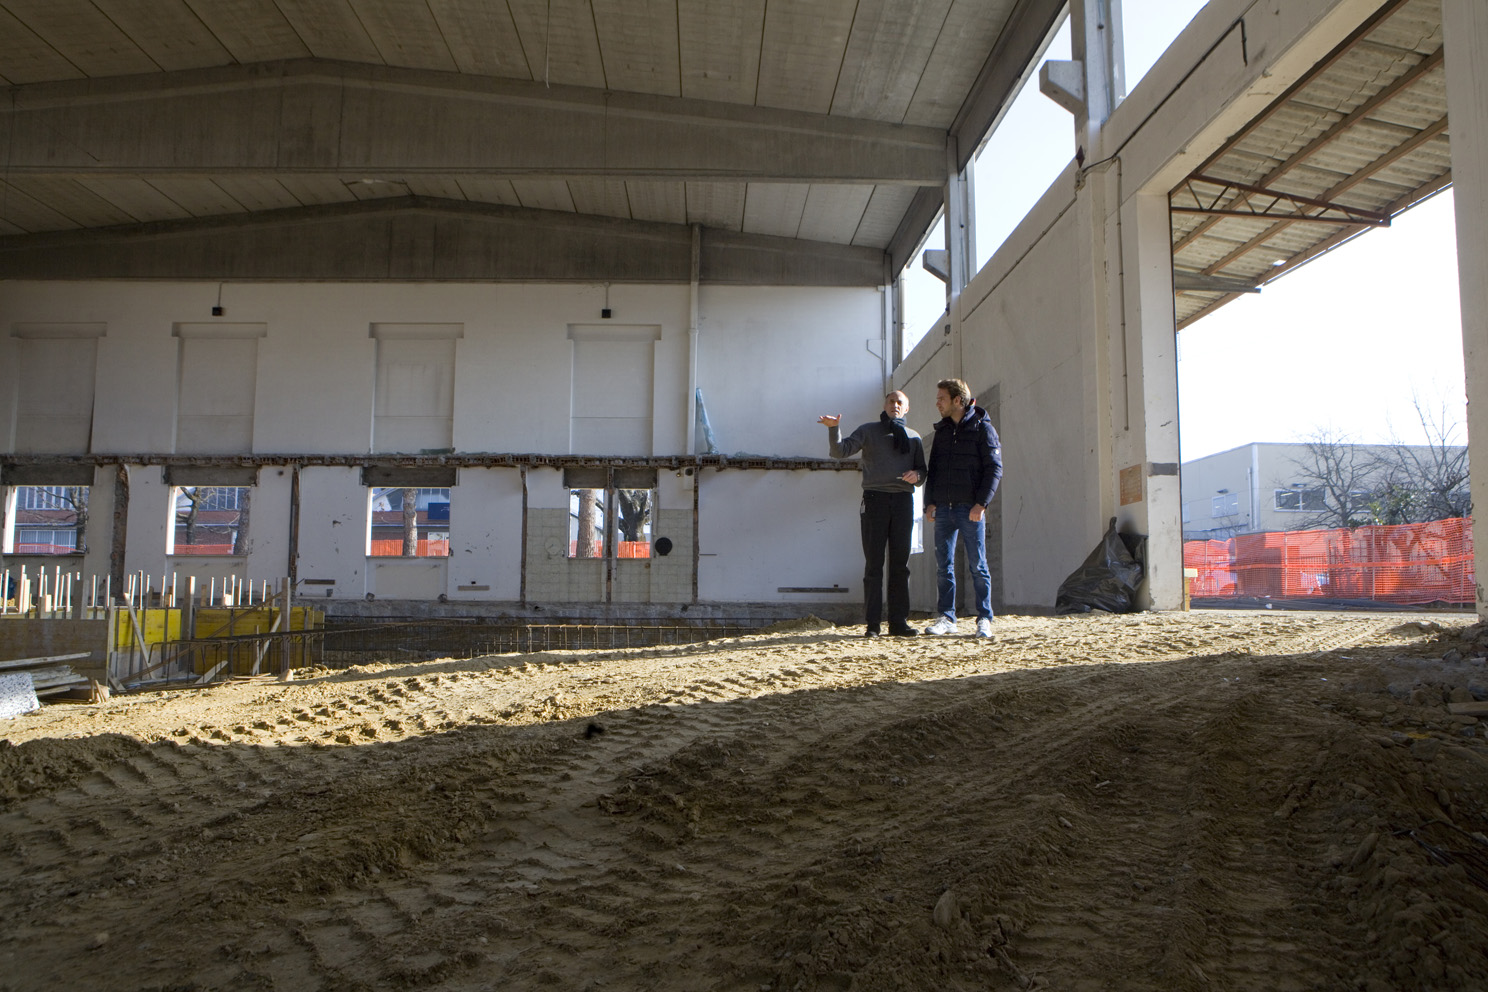 Franz Tost shows Jean-Eric Vergne around the site of the newest part of the Toro Rosso factory